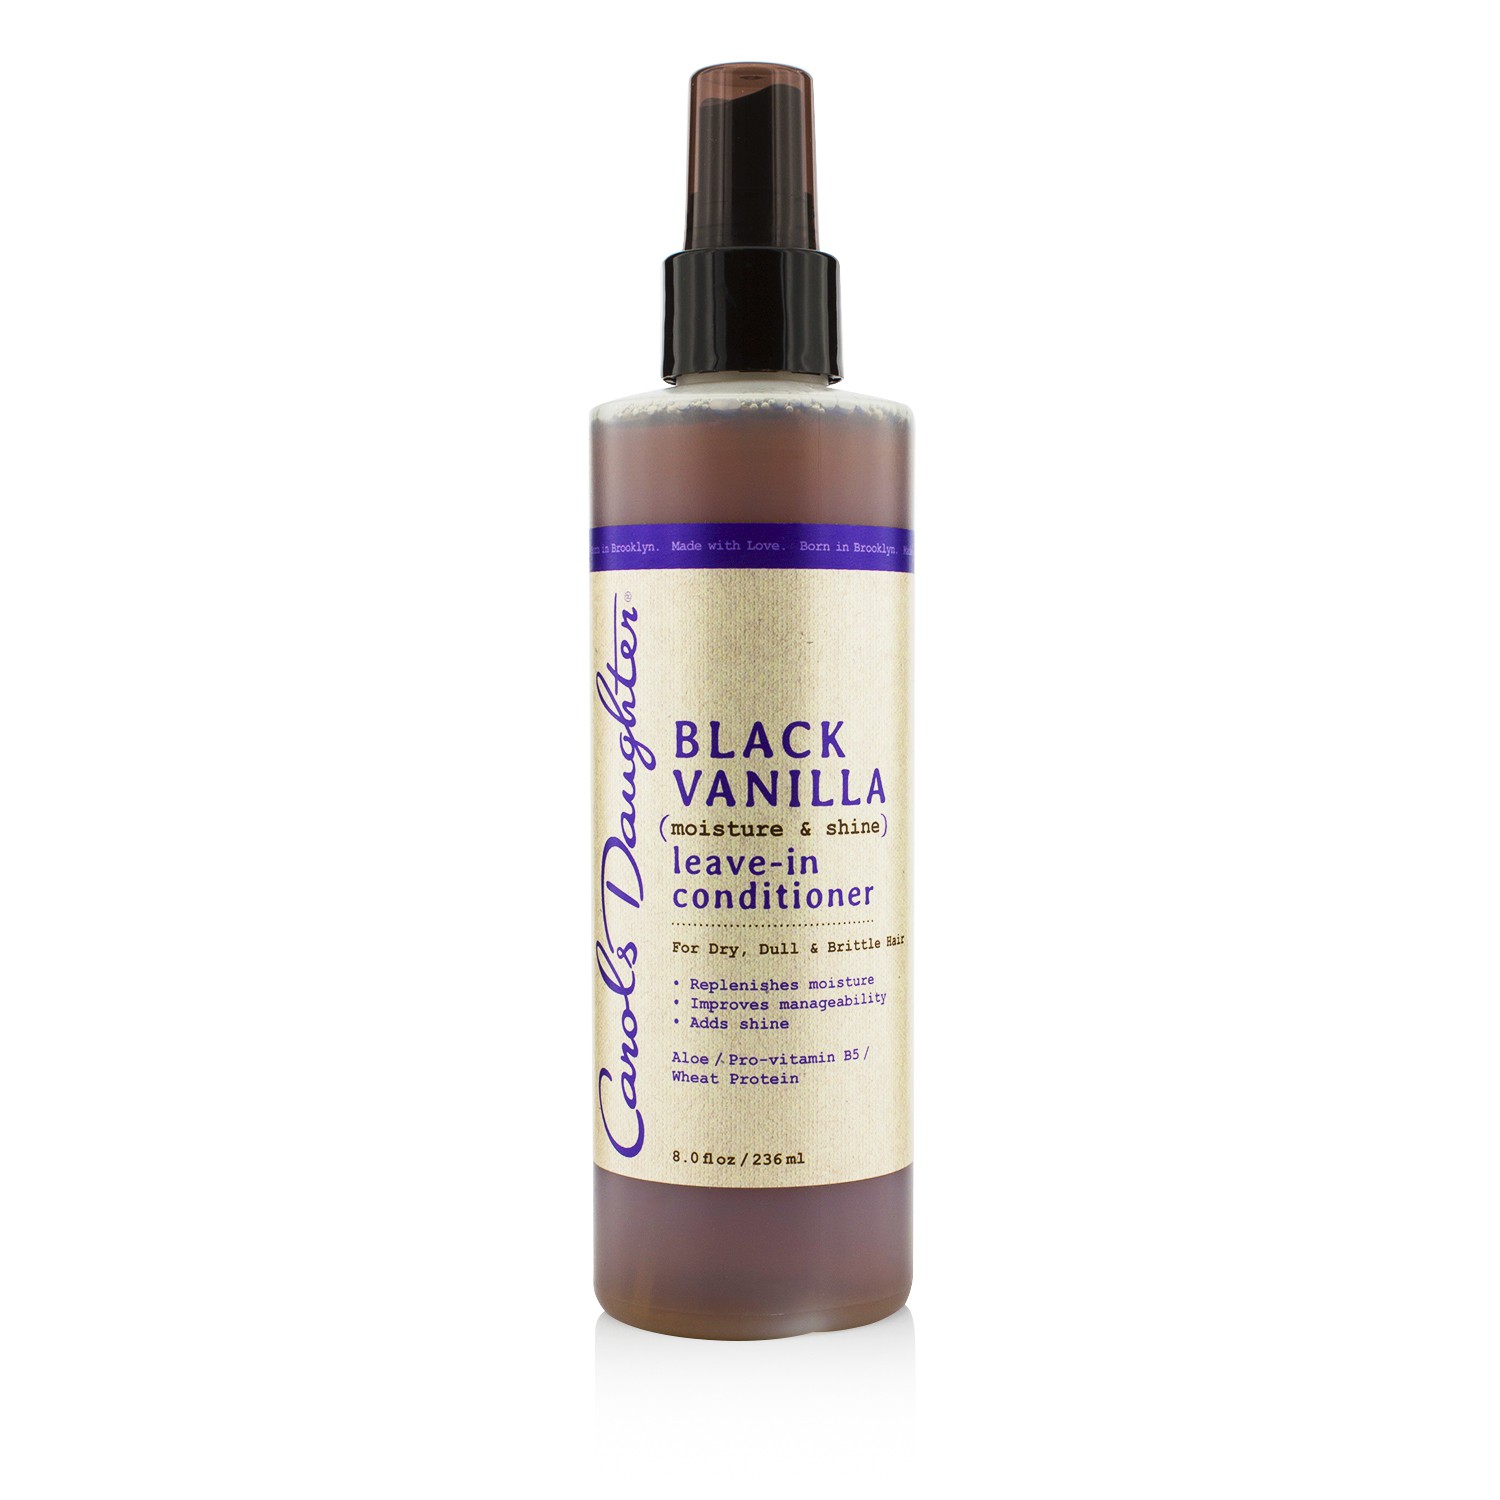 Black Vanilla Moisture & Shine Leave-In Conditioner (For Dry Dull & Brittle Hair) Carols Daughter Image